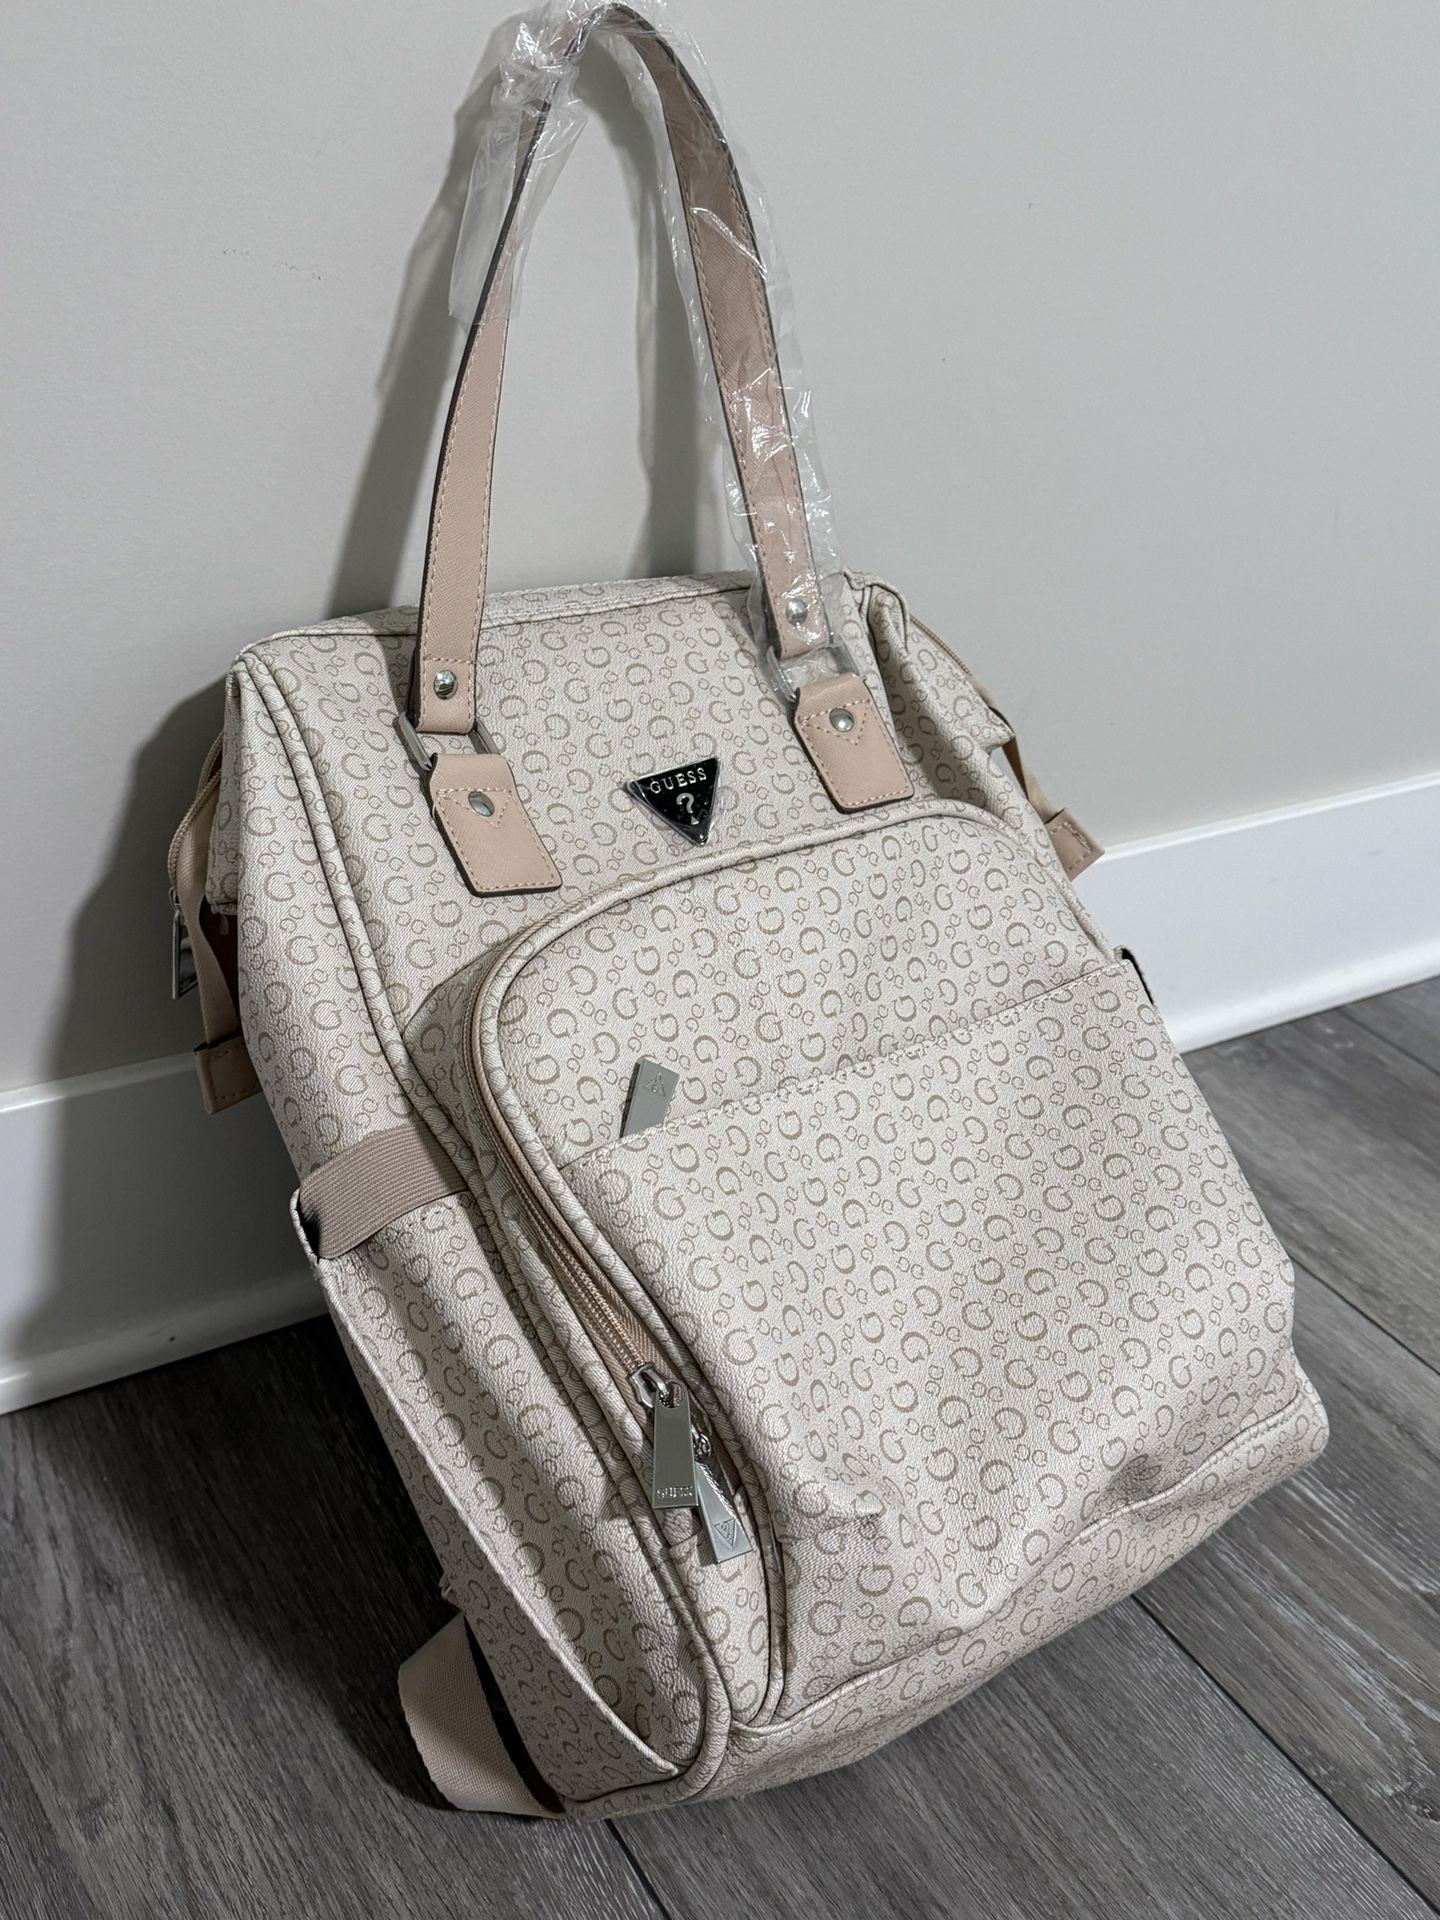 Guess diaper Bag. Brand new With Tags 